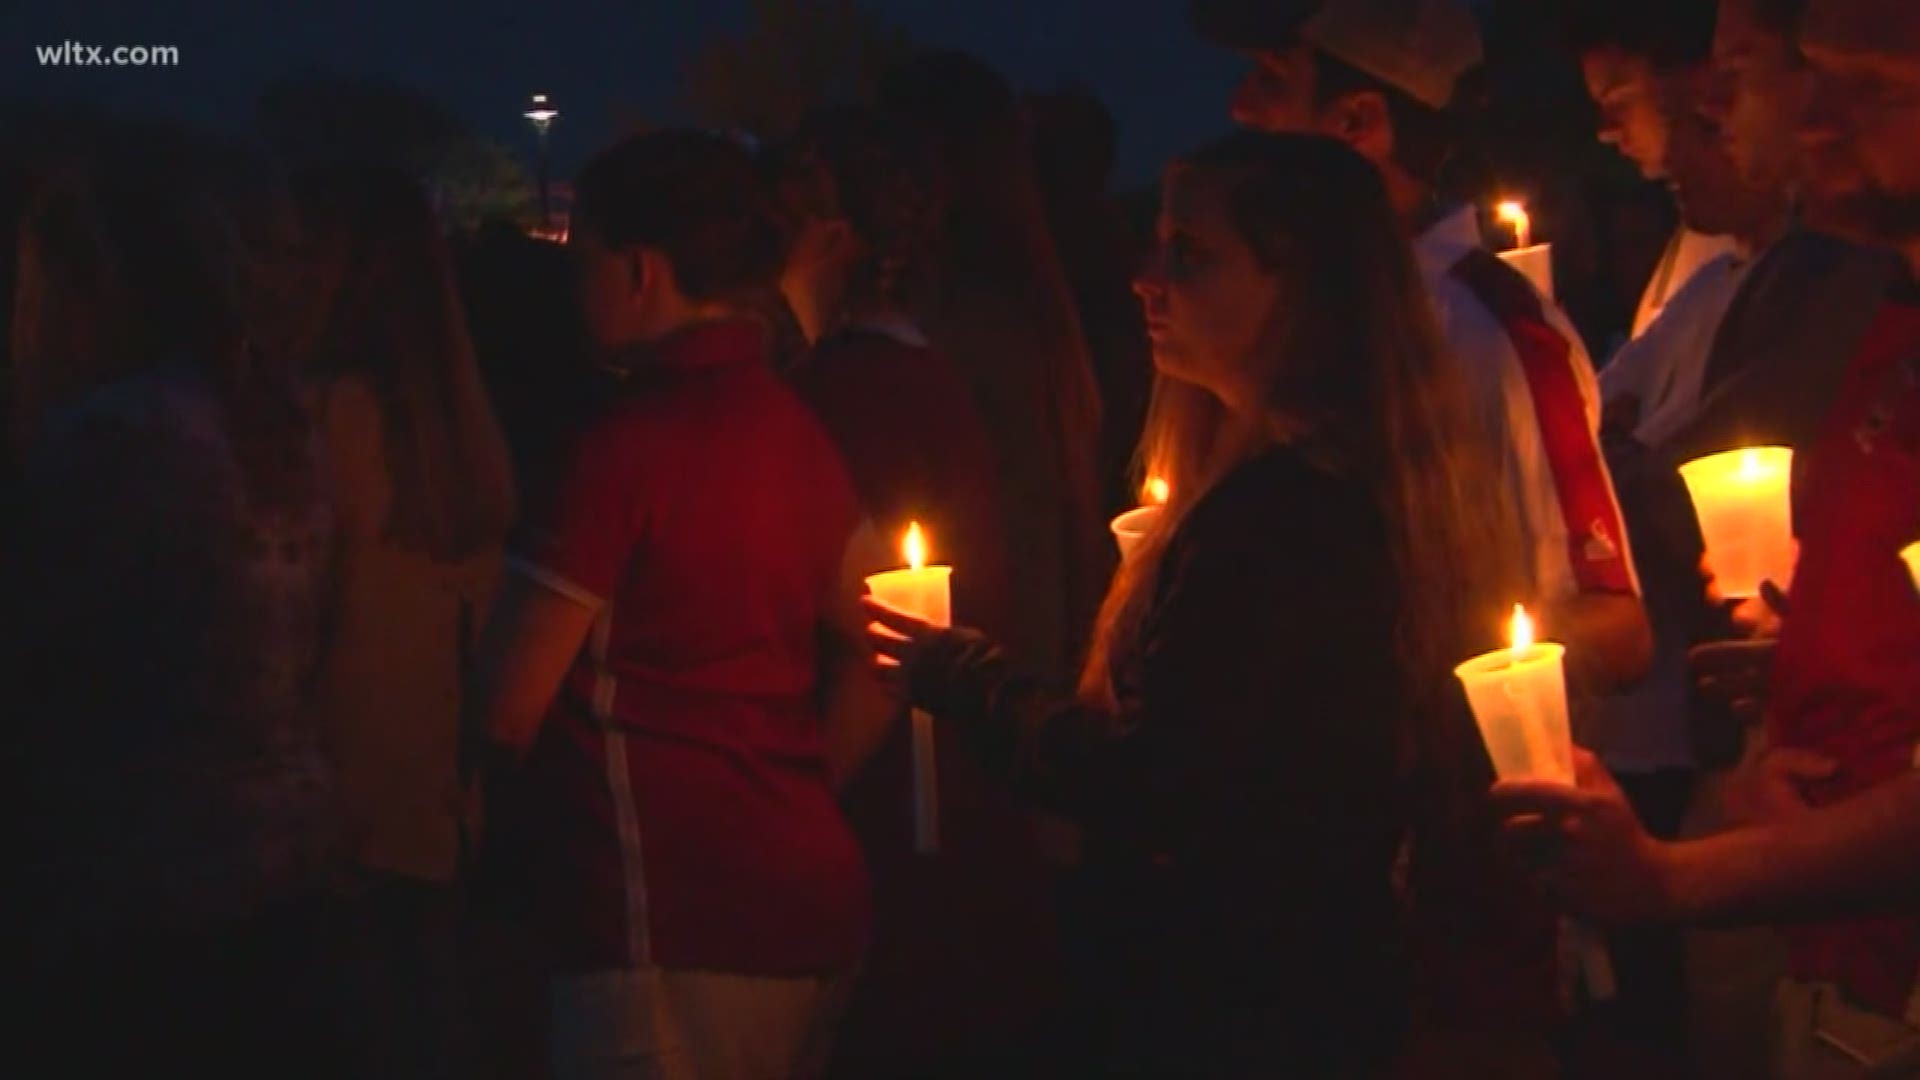 Dozens showed up at a vigil for Samantha Josephson, the University of South Carolina student who was kidnapped and killed.